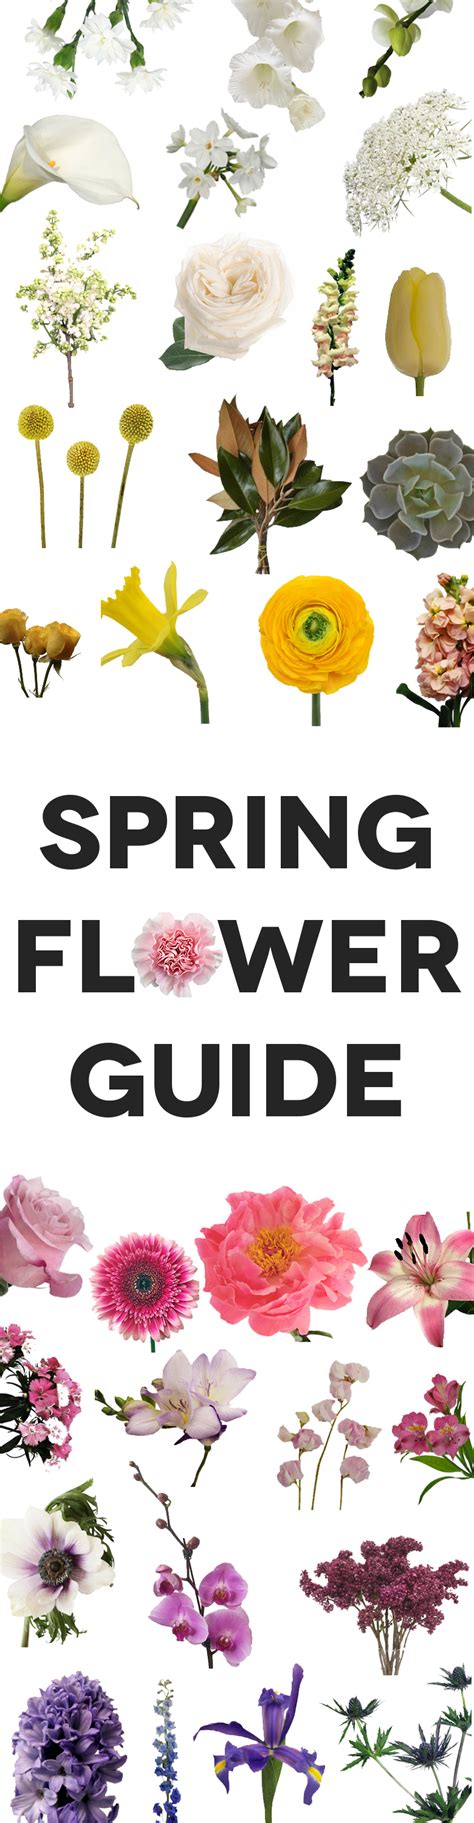 Spring Flowers The Complete Guide A Practical Wedding